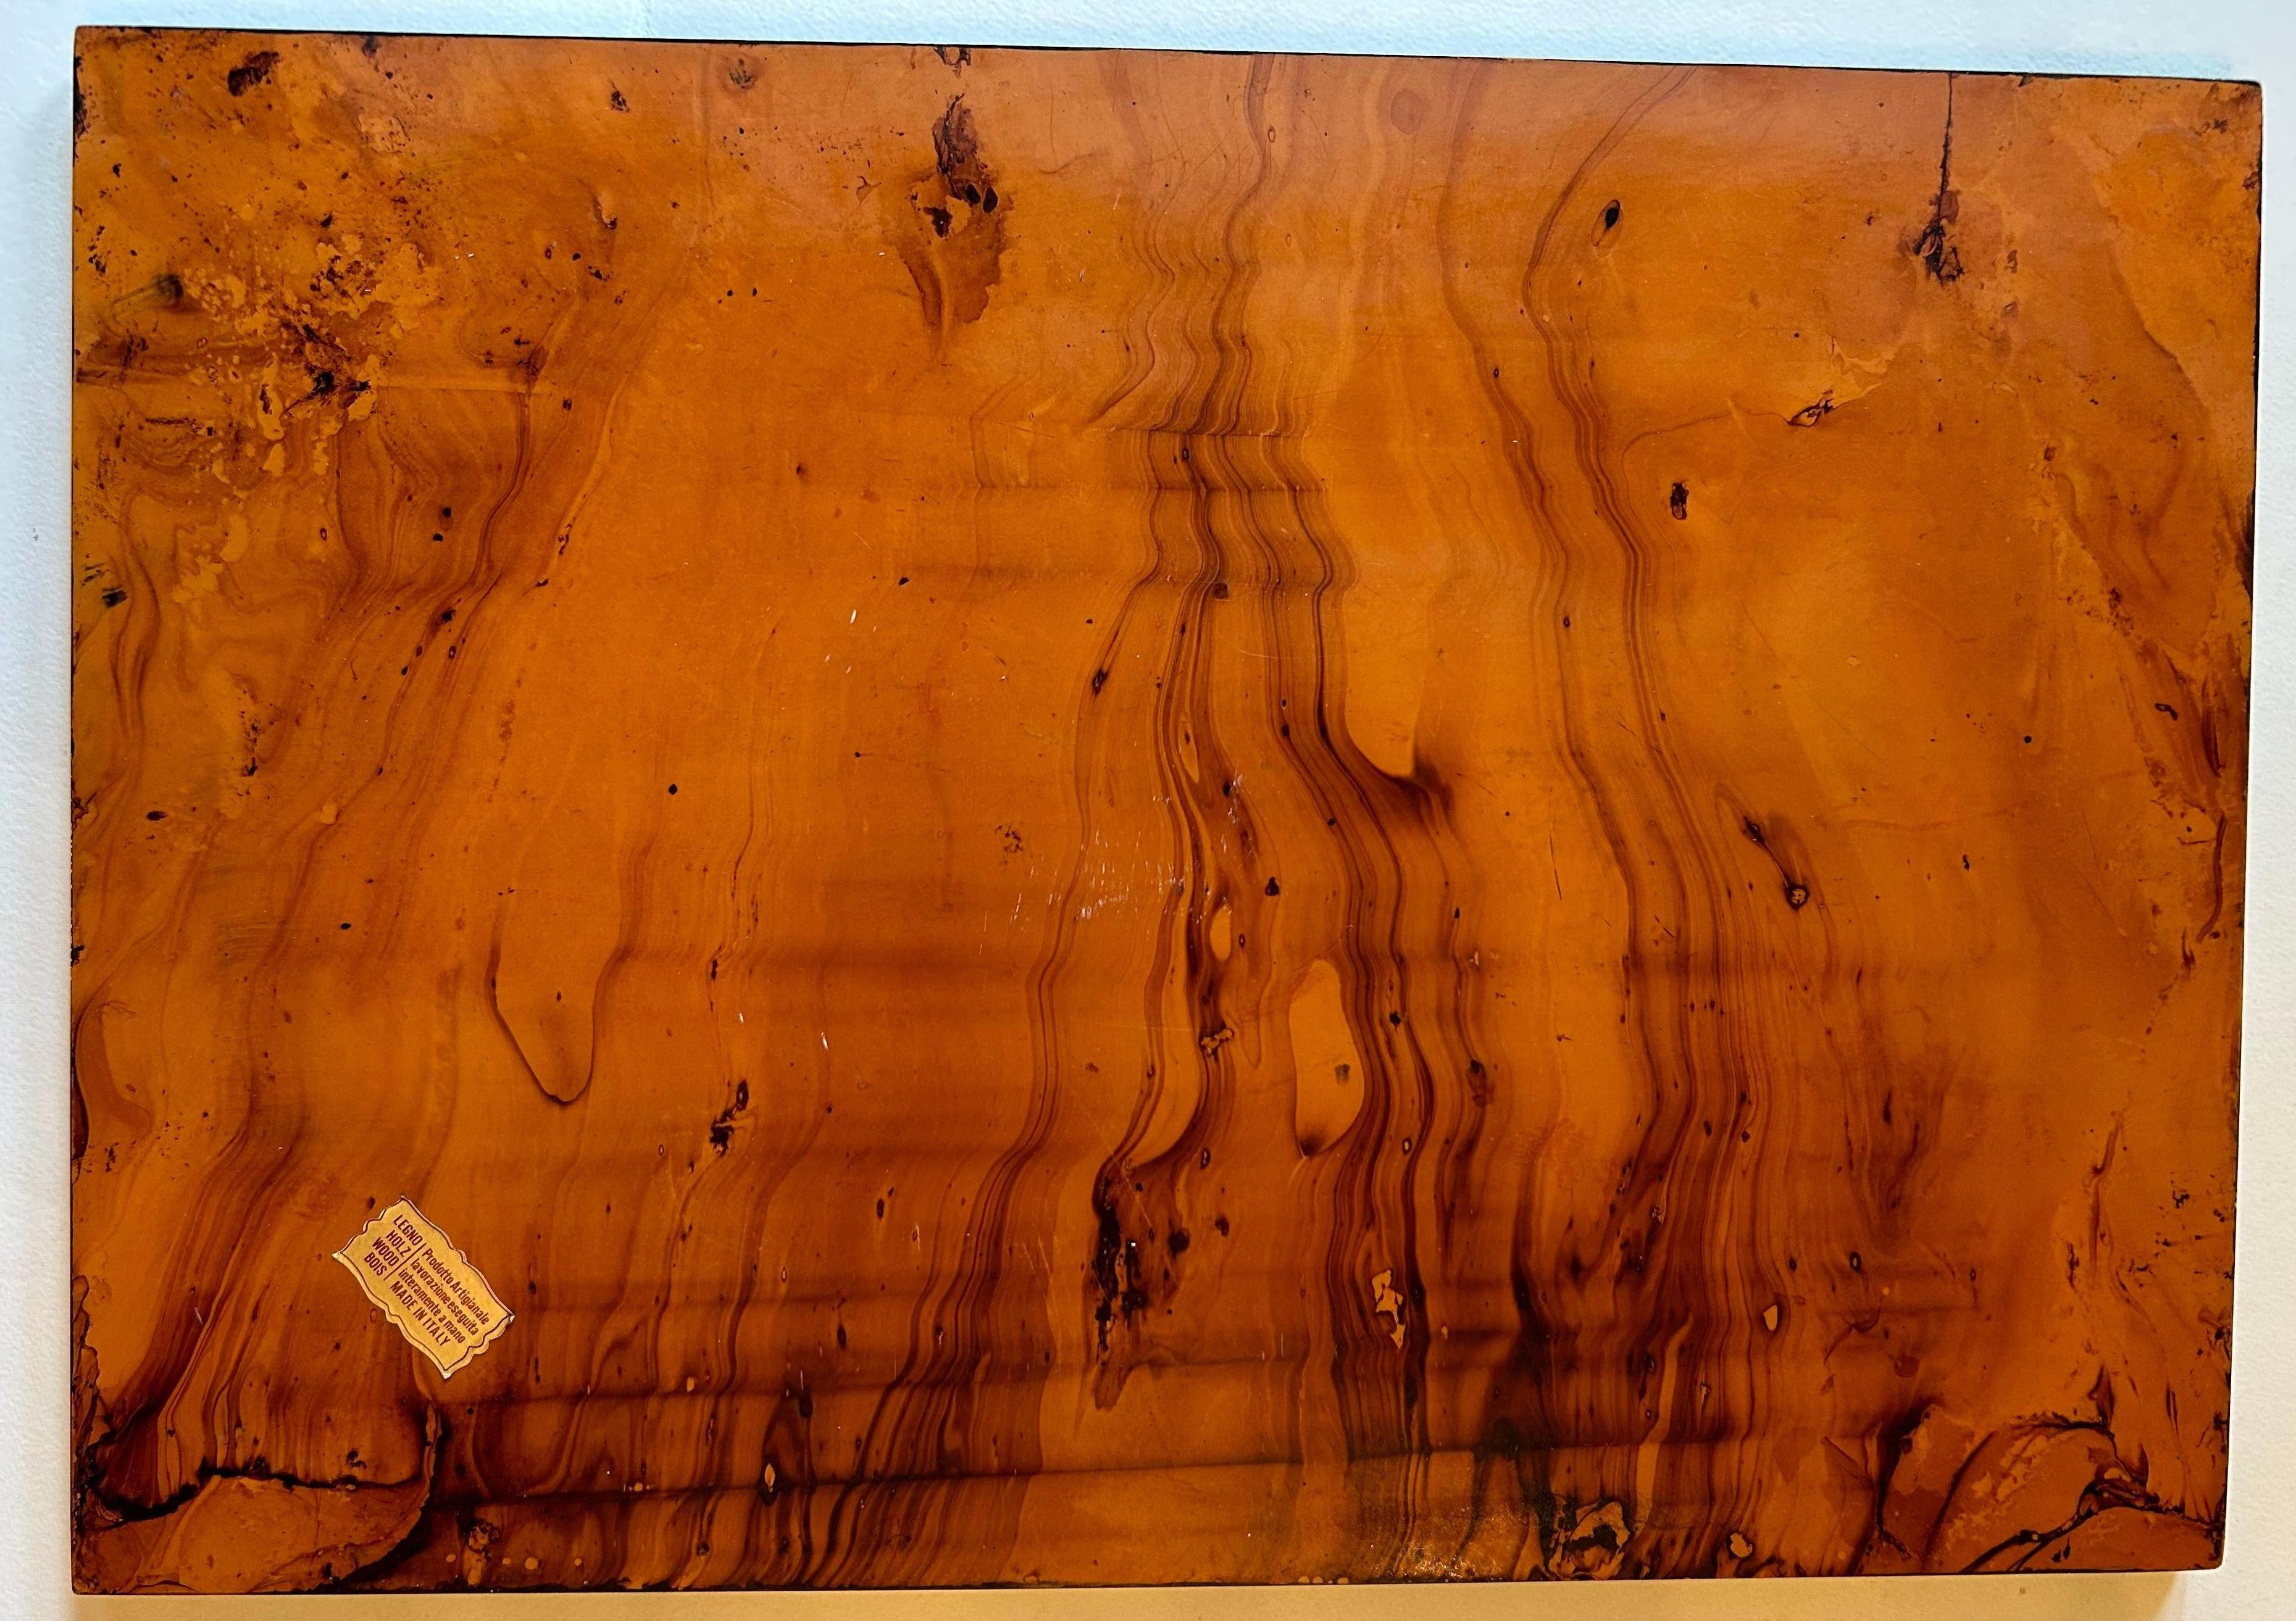 Fabulous 20th Century lacquered wood tray from Italy. Gorgeous colour and patina and in excellent condition.
Perfect as a desk tray, or to serve drinks or coffee. Makes a wonderful hostess gift.